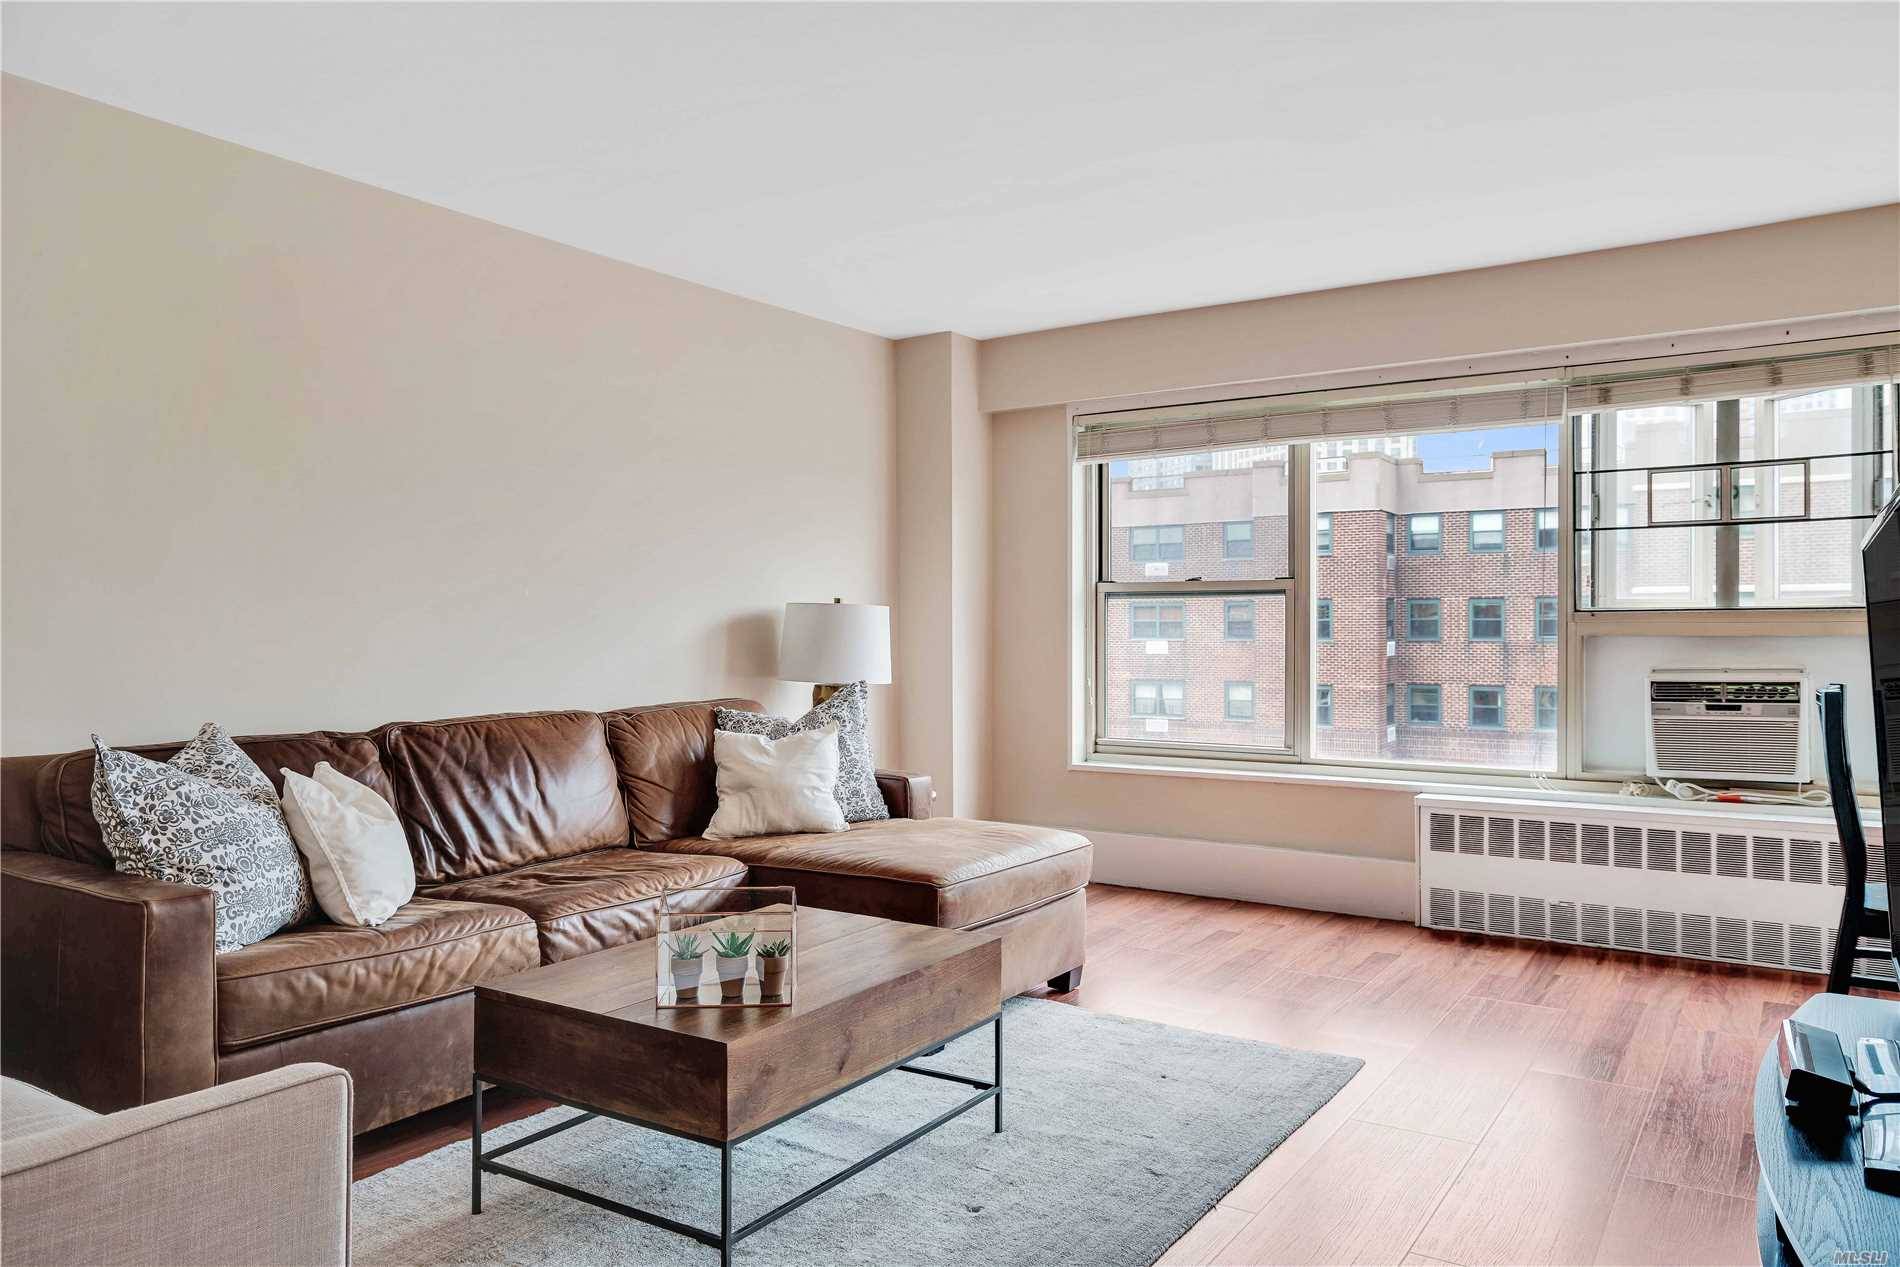 Perched high atop the tree line with amazing views of the Manhattan Bridge and cityscape, this spacious and artfully laid out 1br co op unit is yours for the taking ...